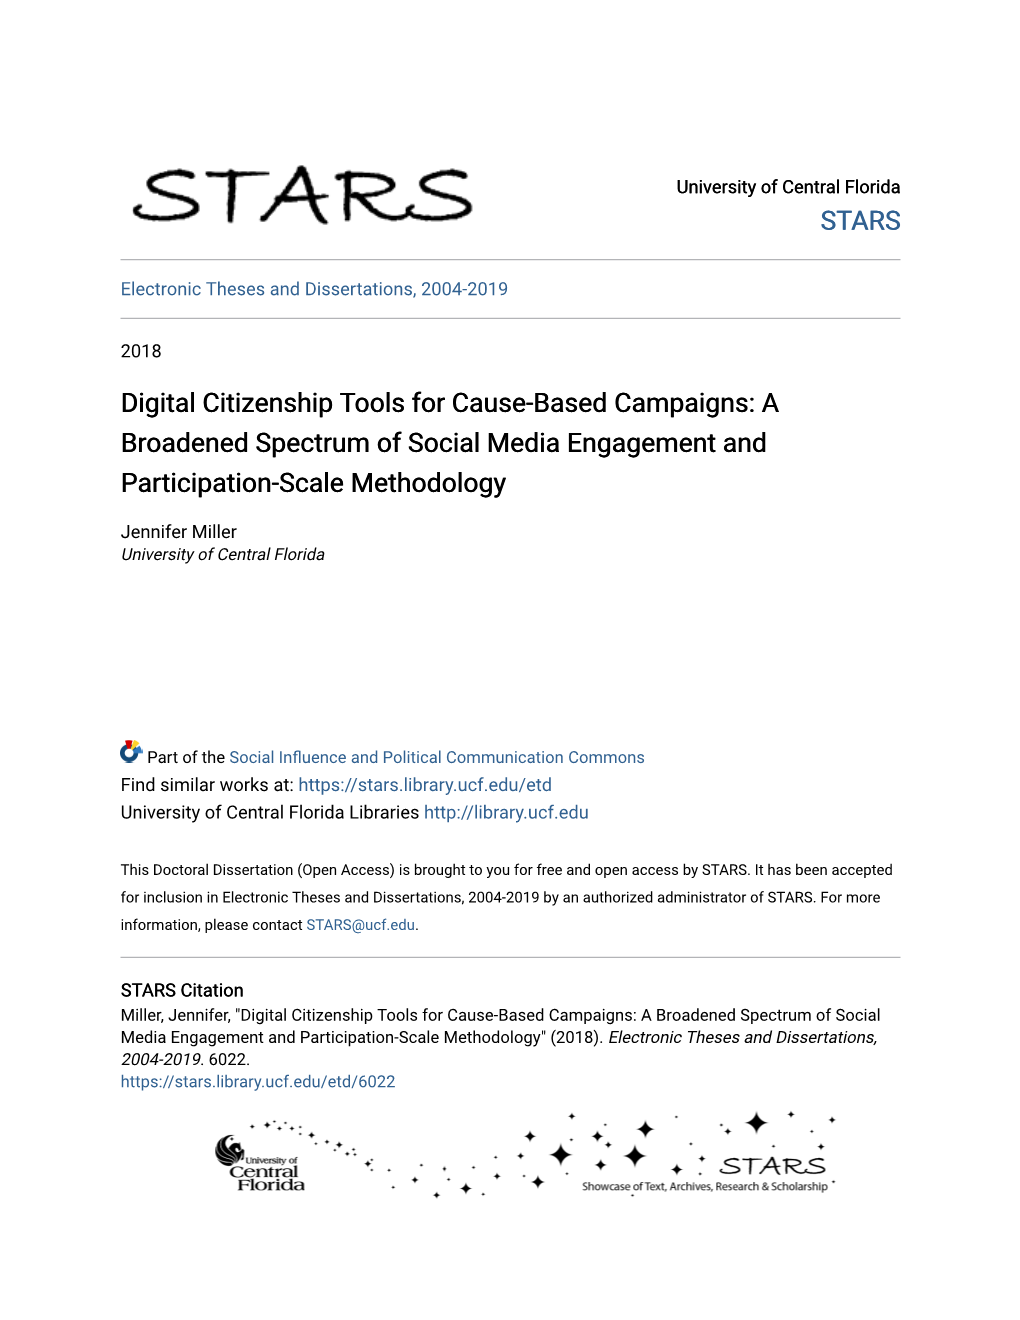 Digital Citizenship Tools for Cause-Based Campaigns: a Broadened Spectrum of Social Media Engagement and Participation-Scale Methodology